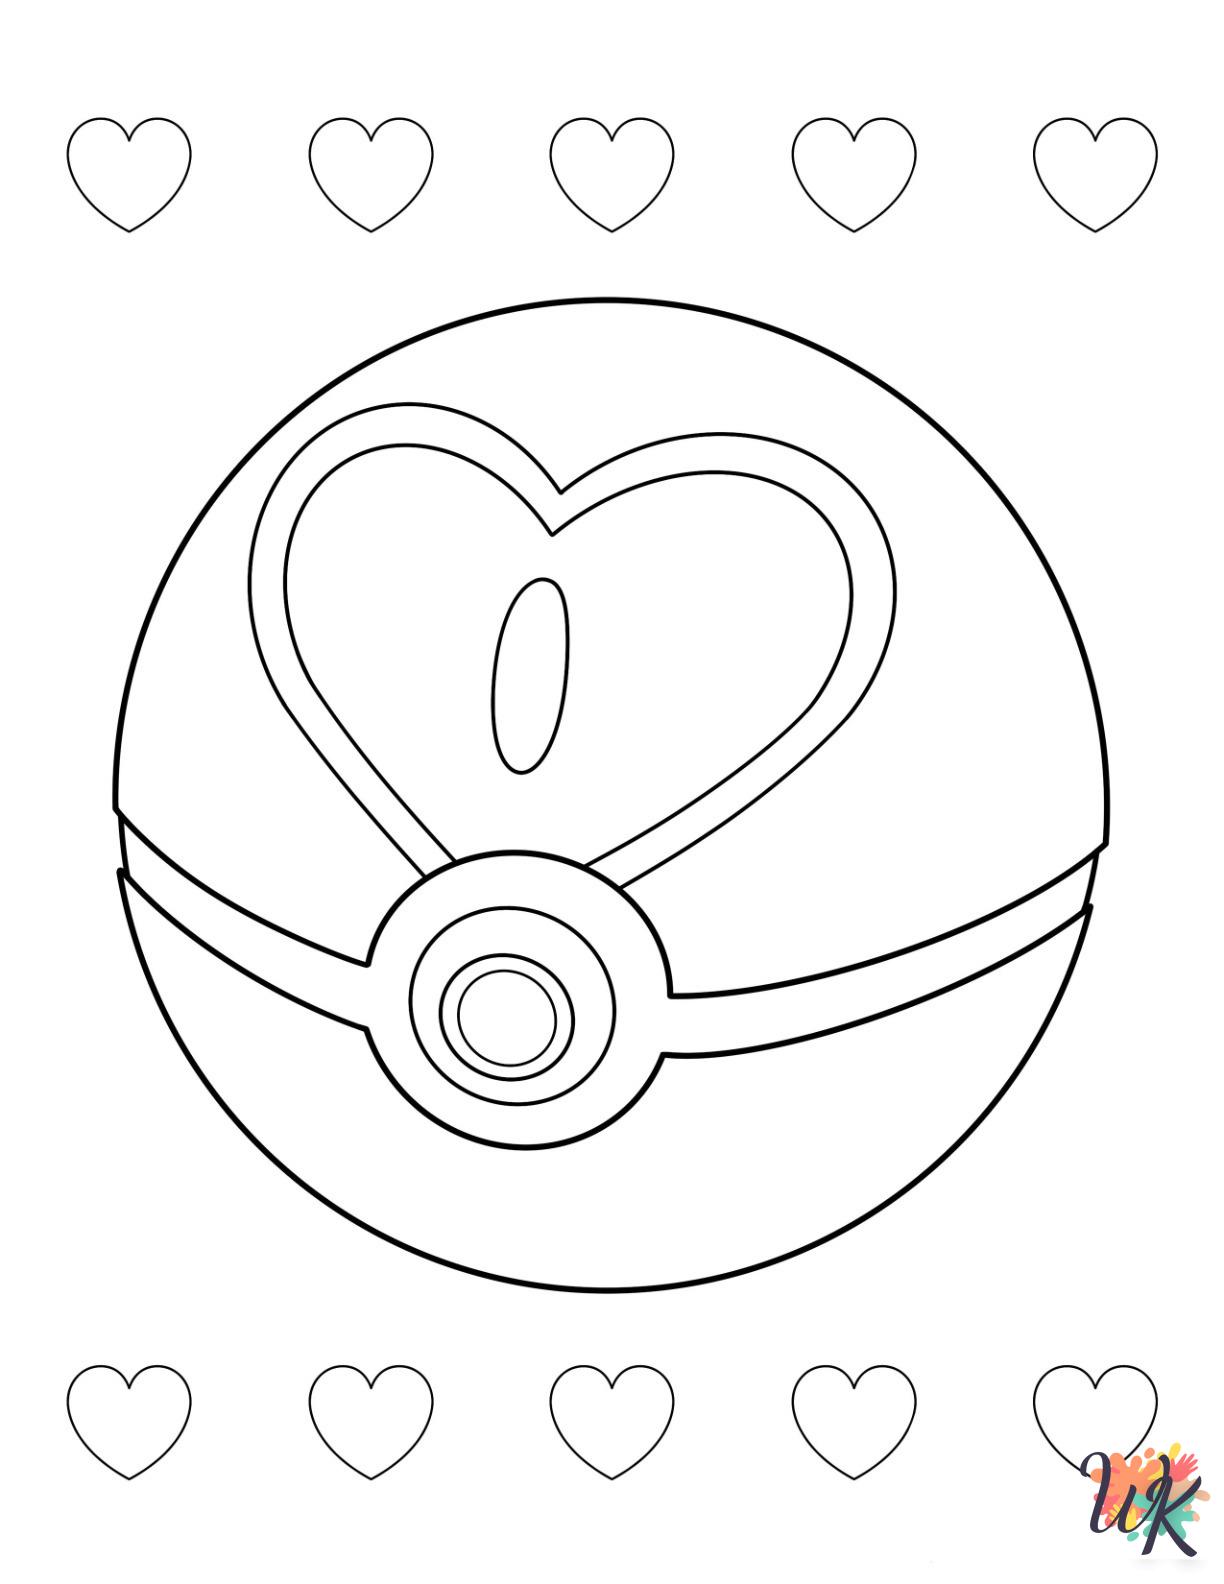 adult coloring pages Pokeball